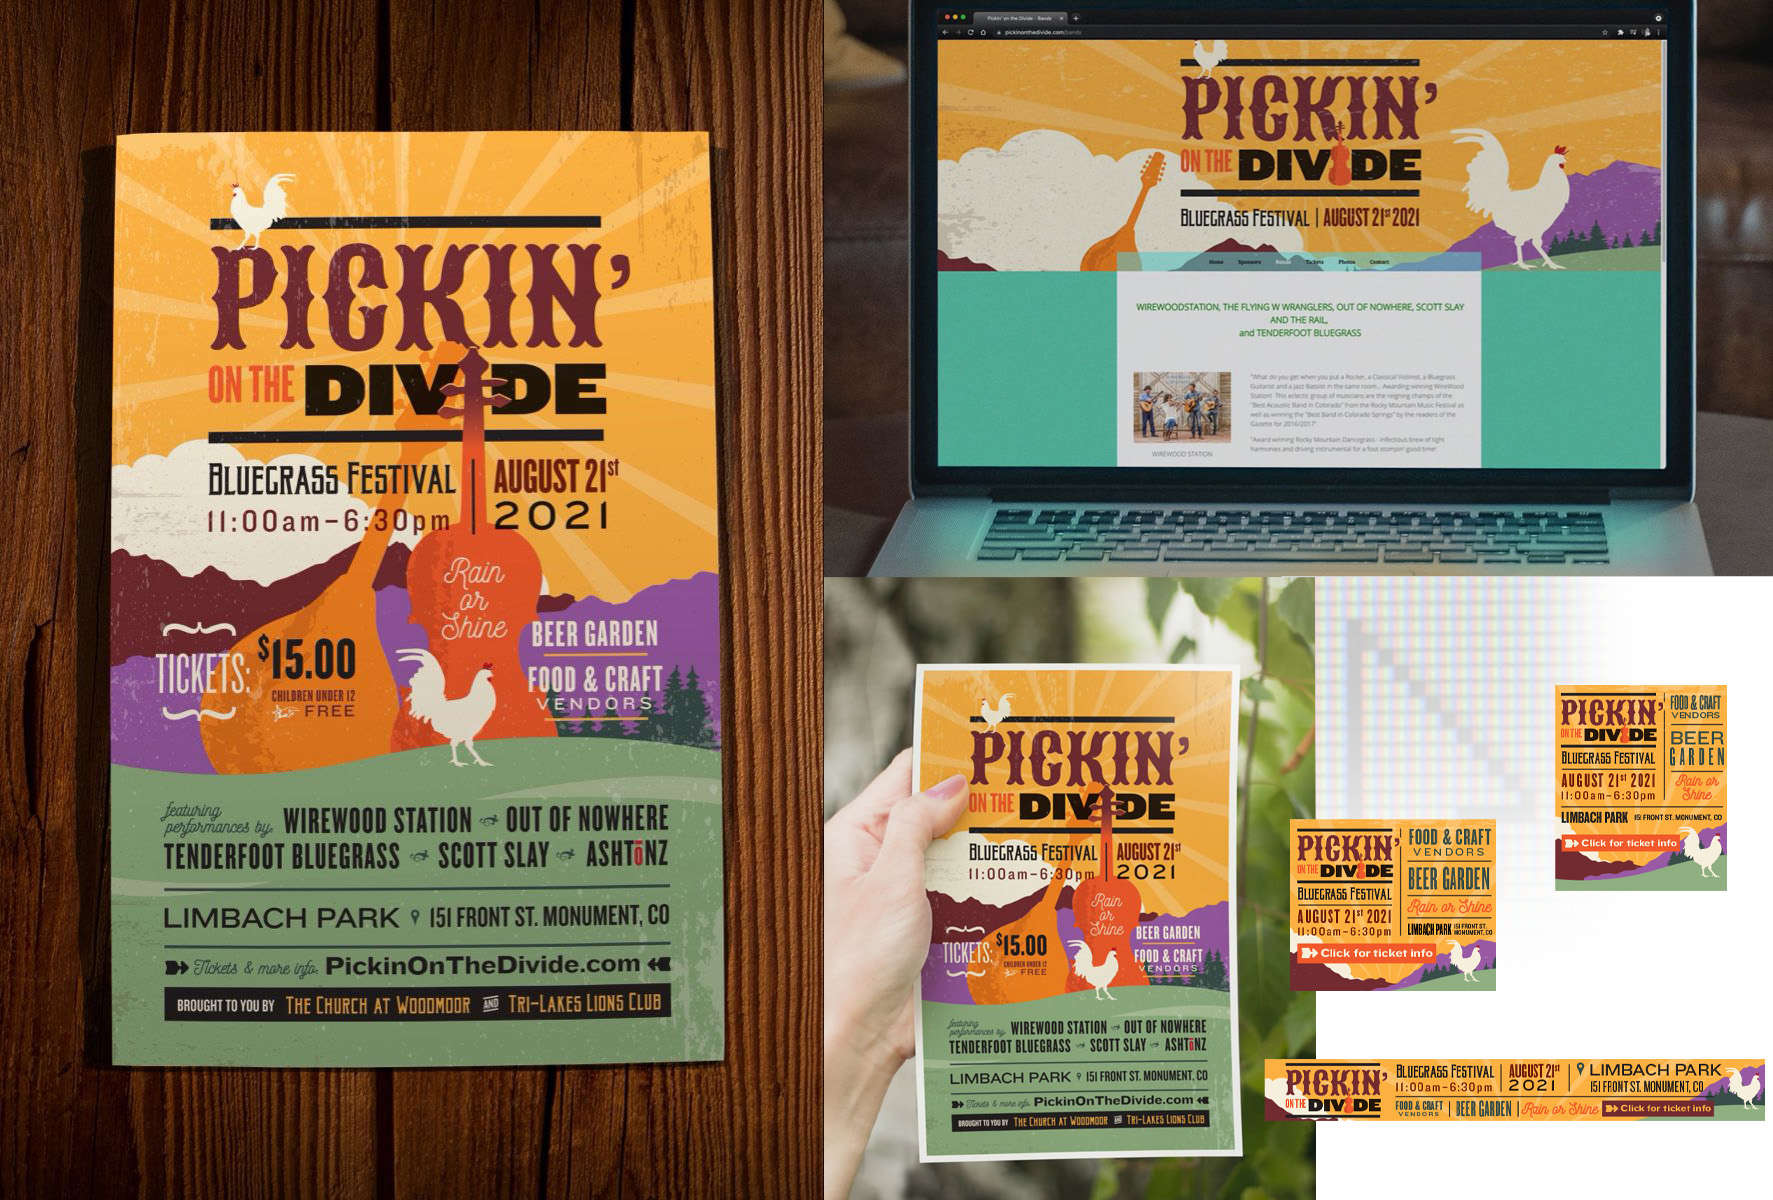 designs for poster, flyers, web site and digital banner ads for Pickin' on the Divide music festival